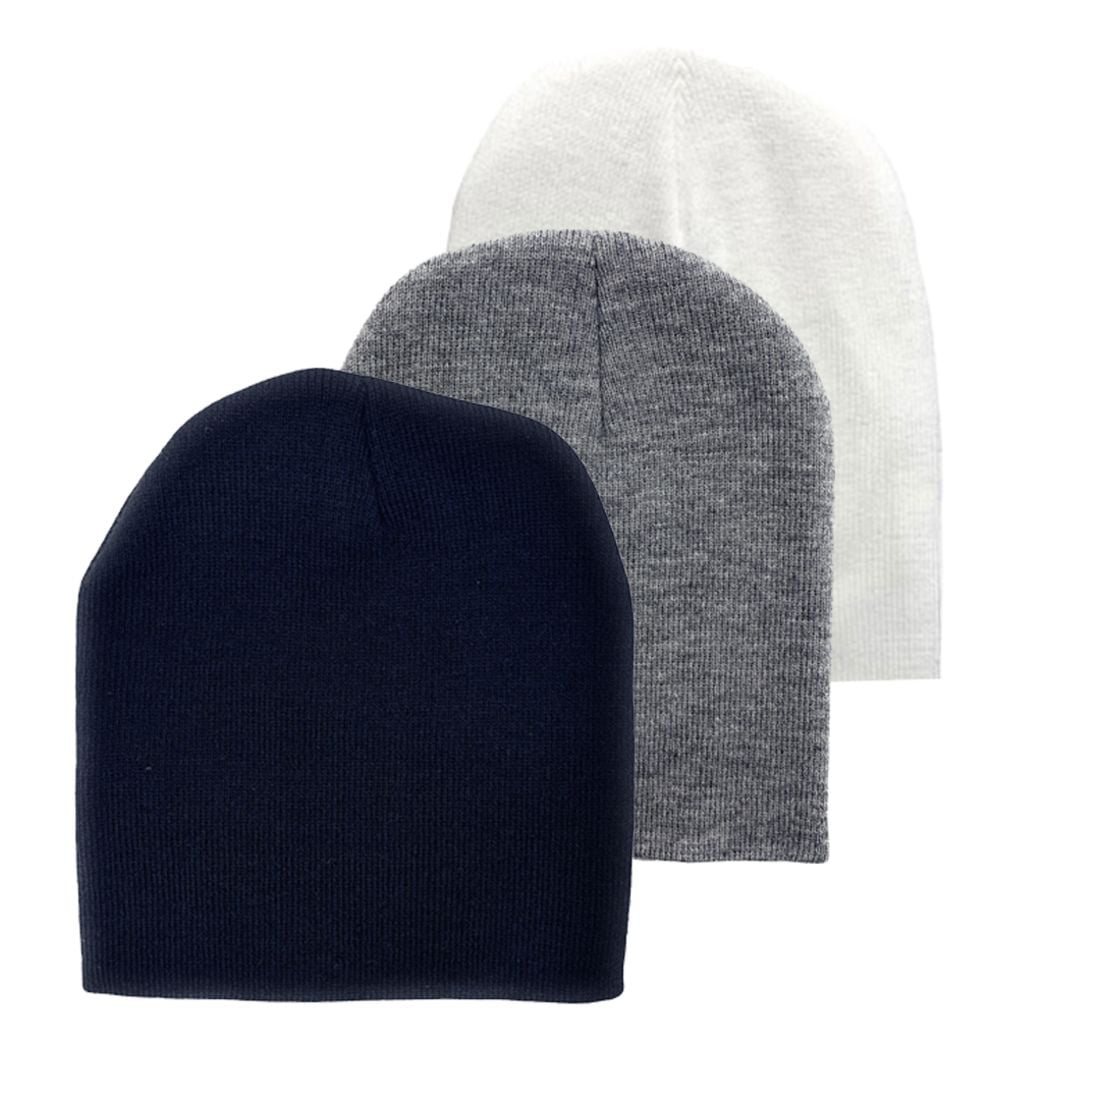 Empire Cove Short Uncuffed Knit Beanie 3 Pack Set of Black Heather Grey ...